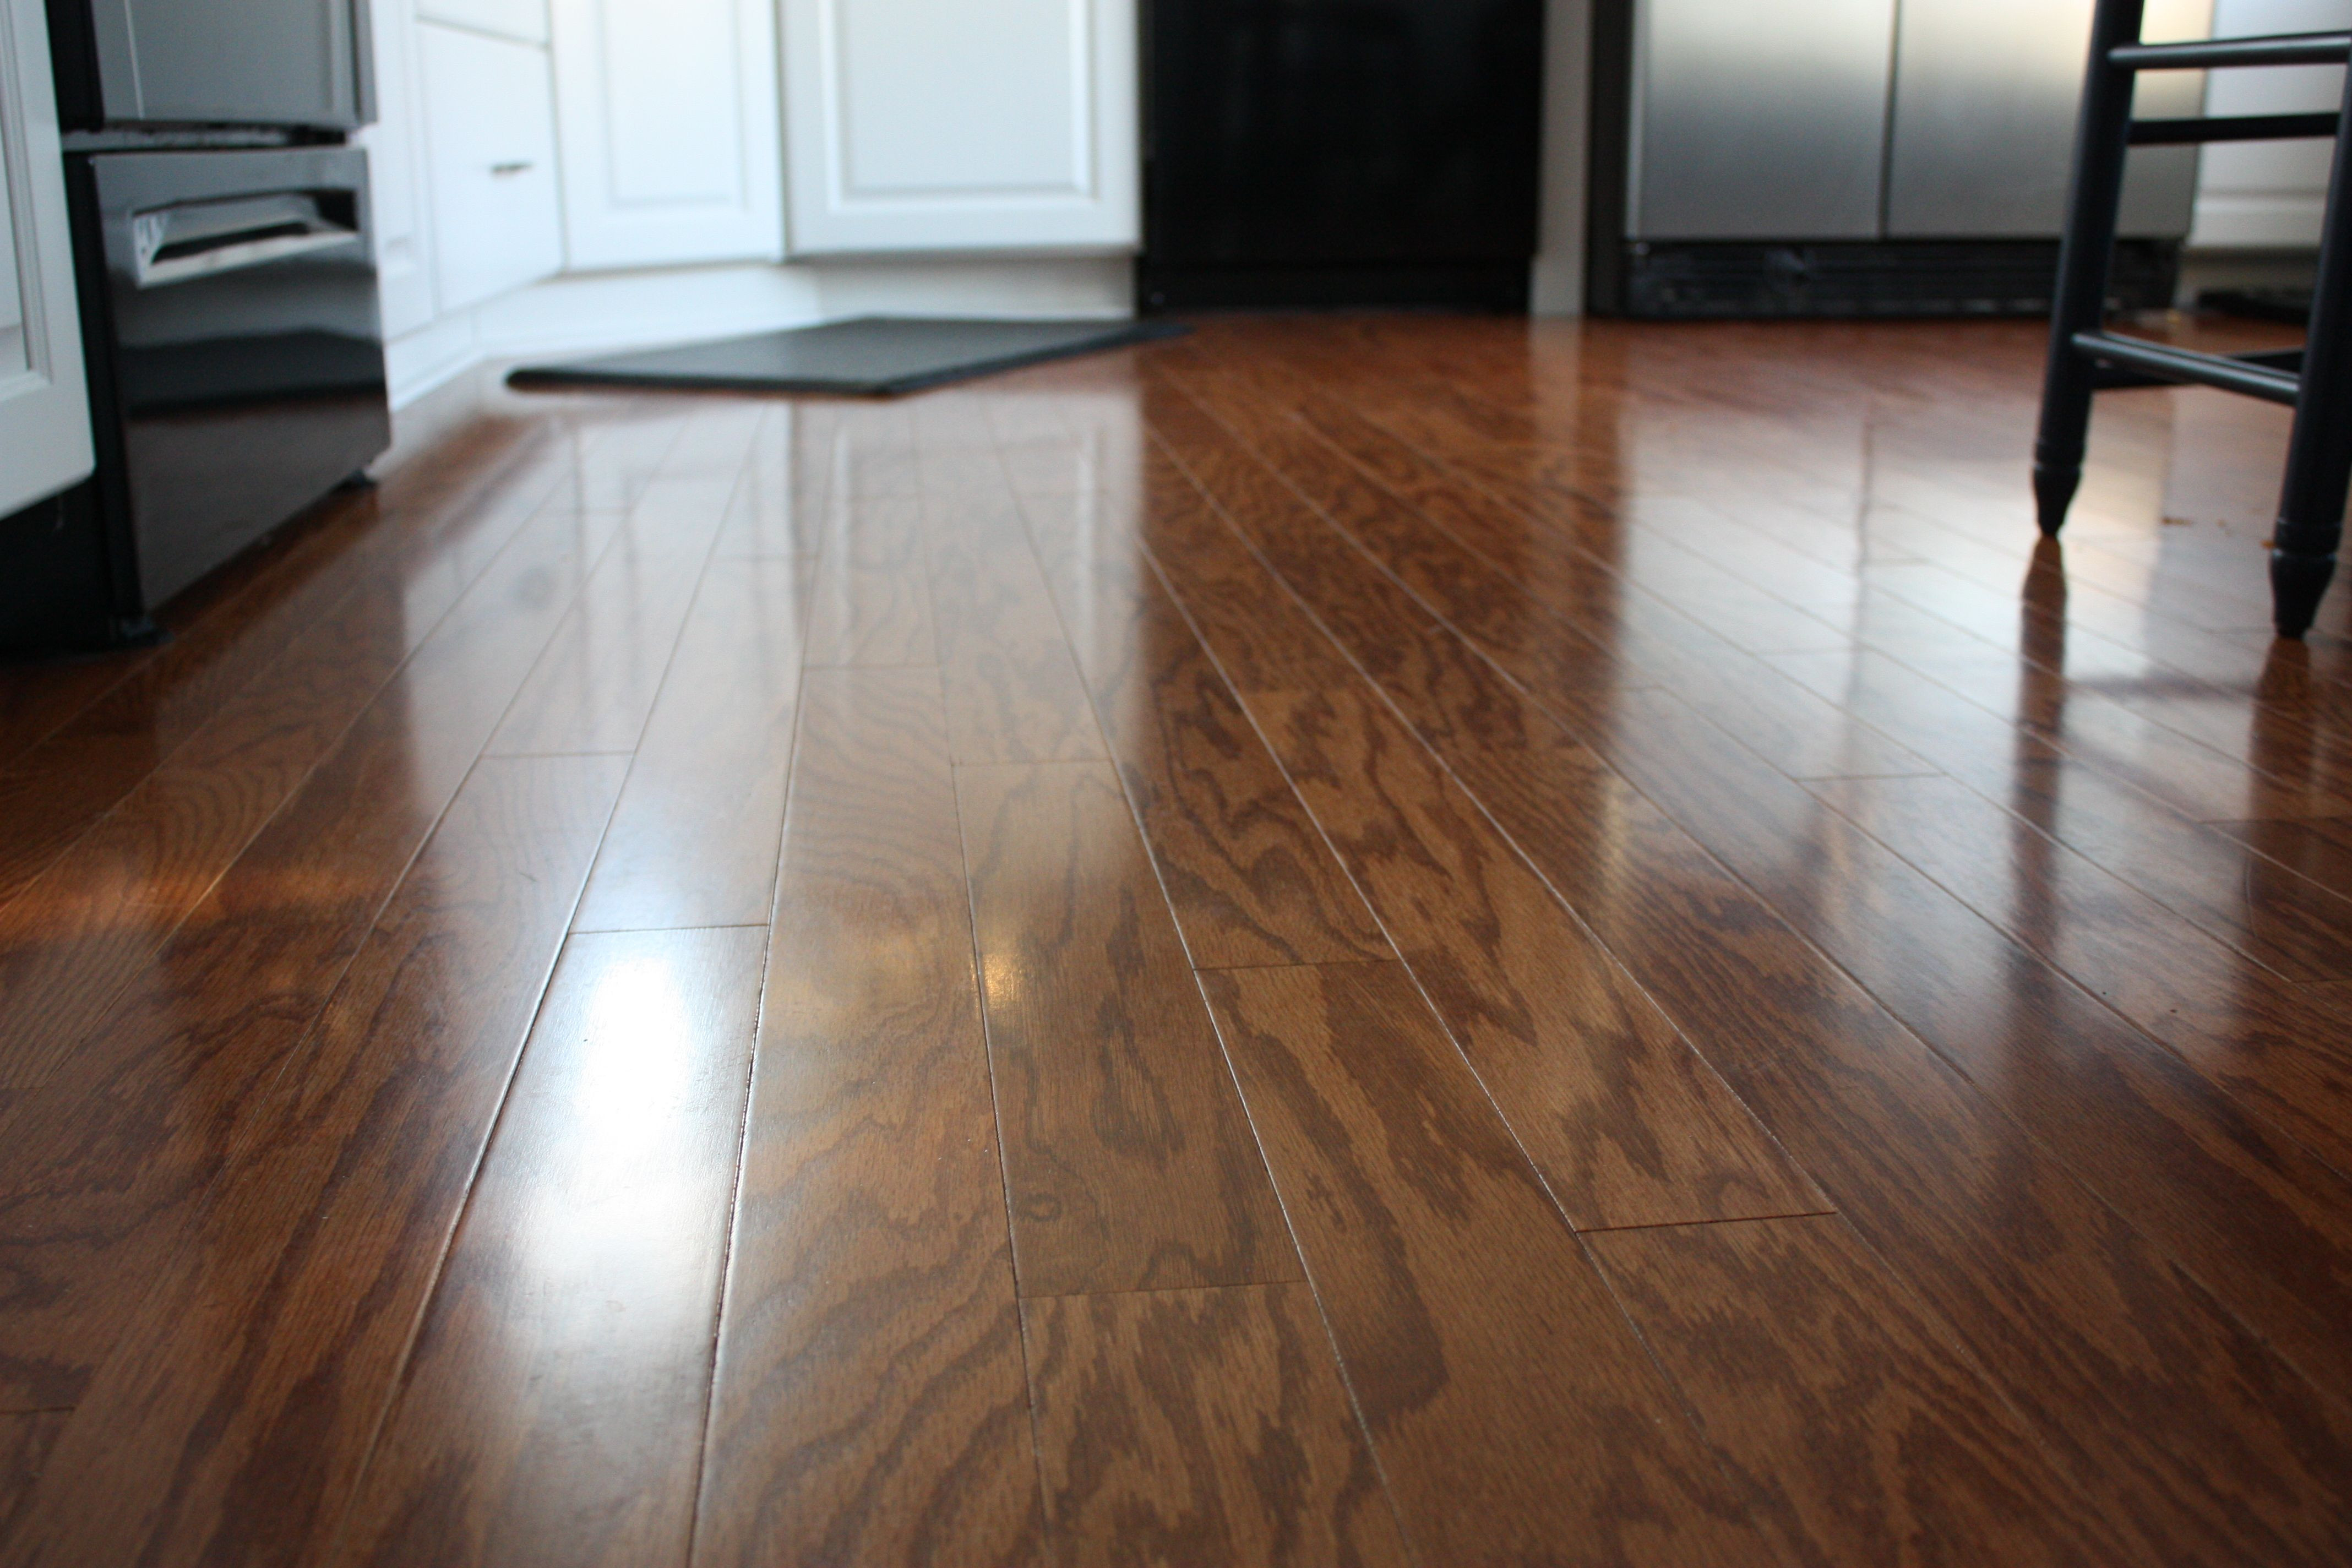 28 Famous Hardwood Floor solutions 2023 free download hardwood floor solutions of house of order tip 2 focus on the floors cleaning pinterest intended for house of order tip 2 focus on the floors